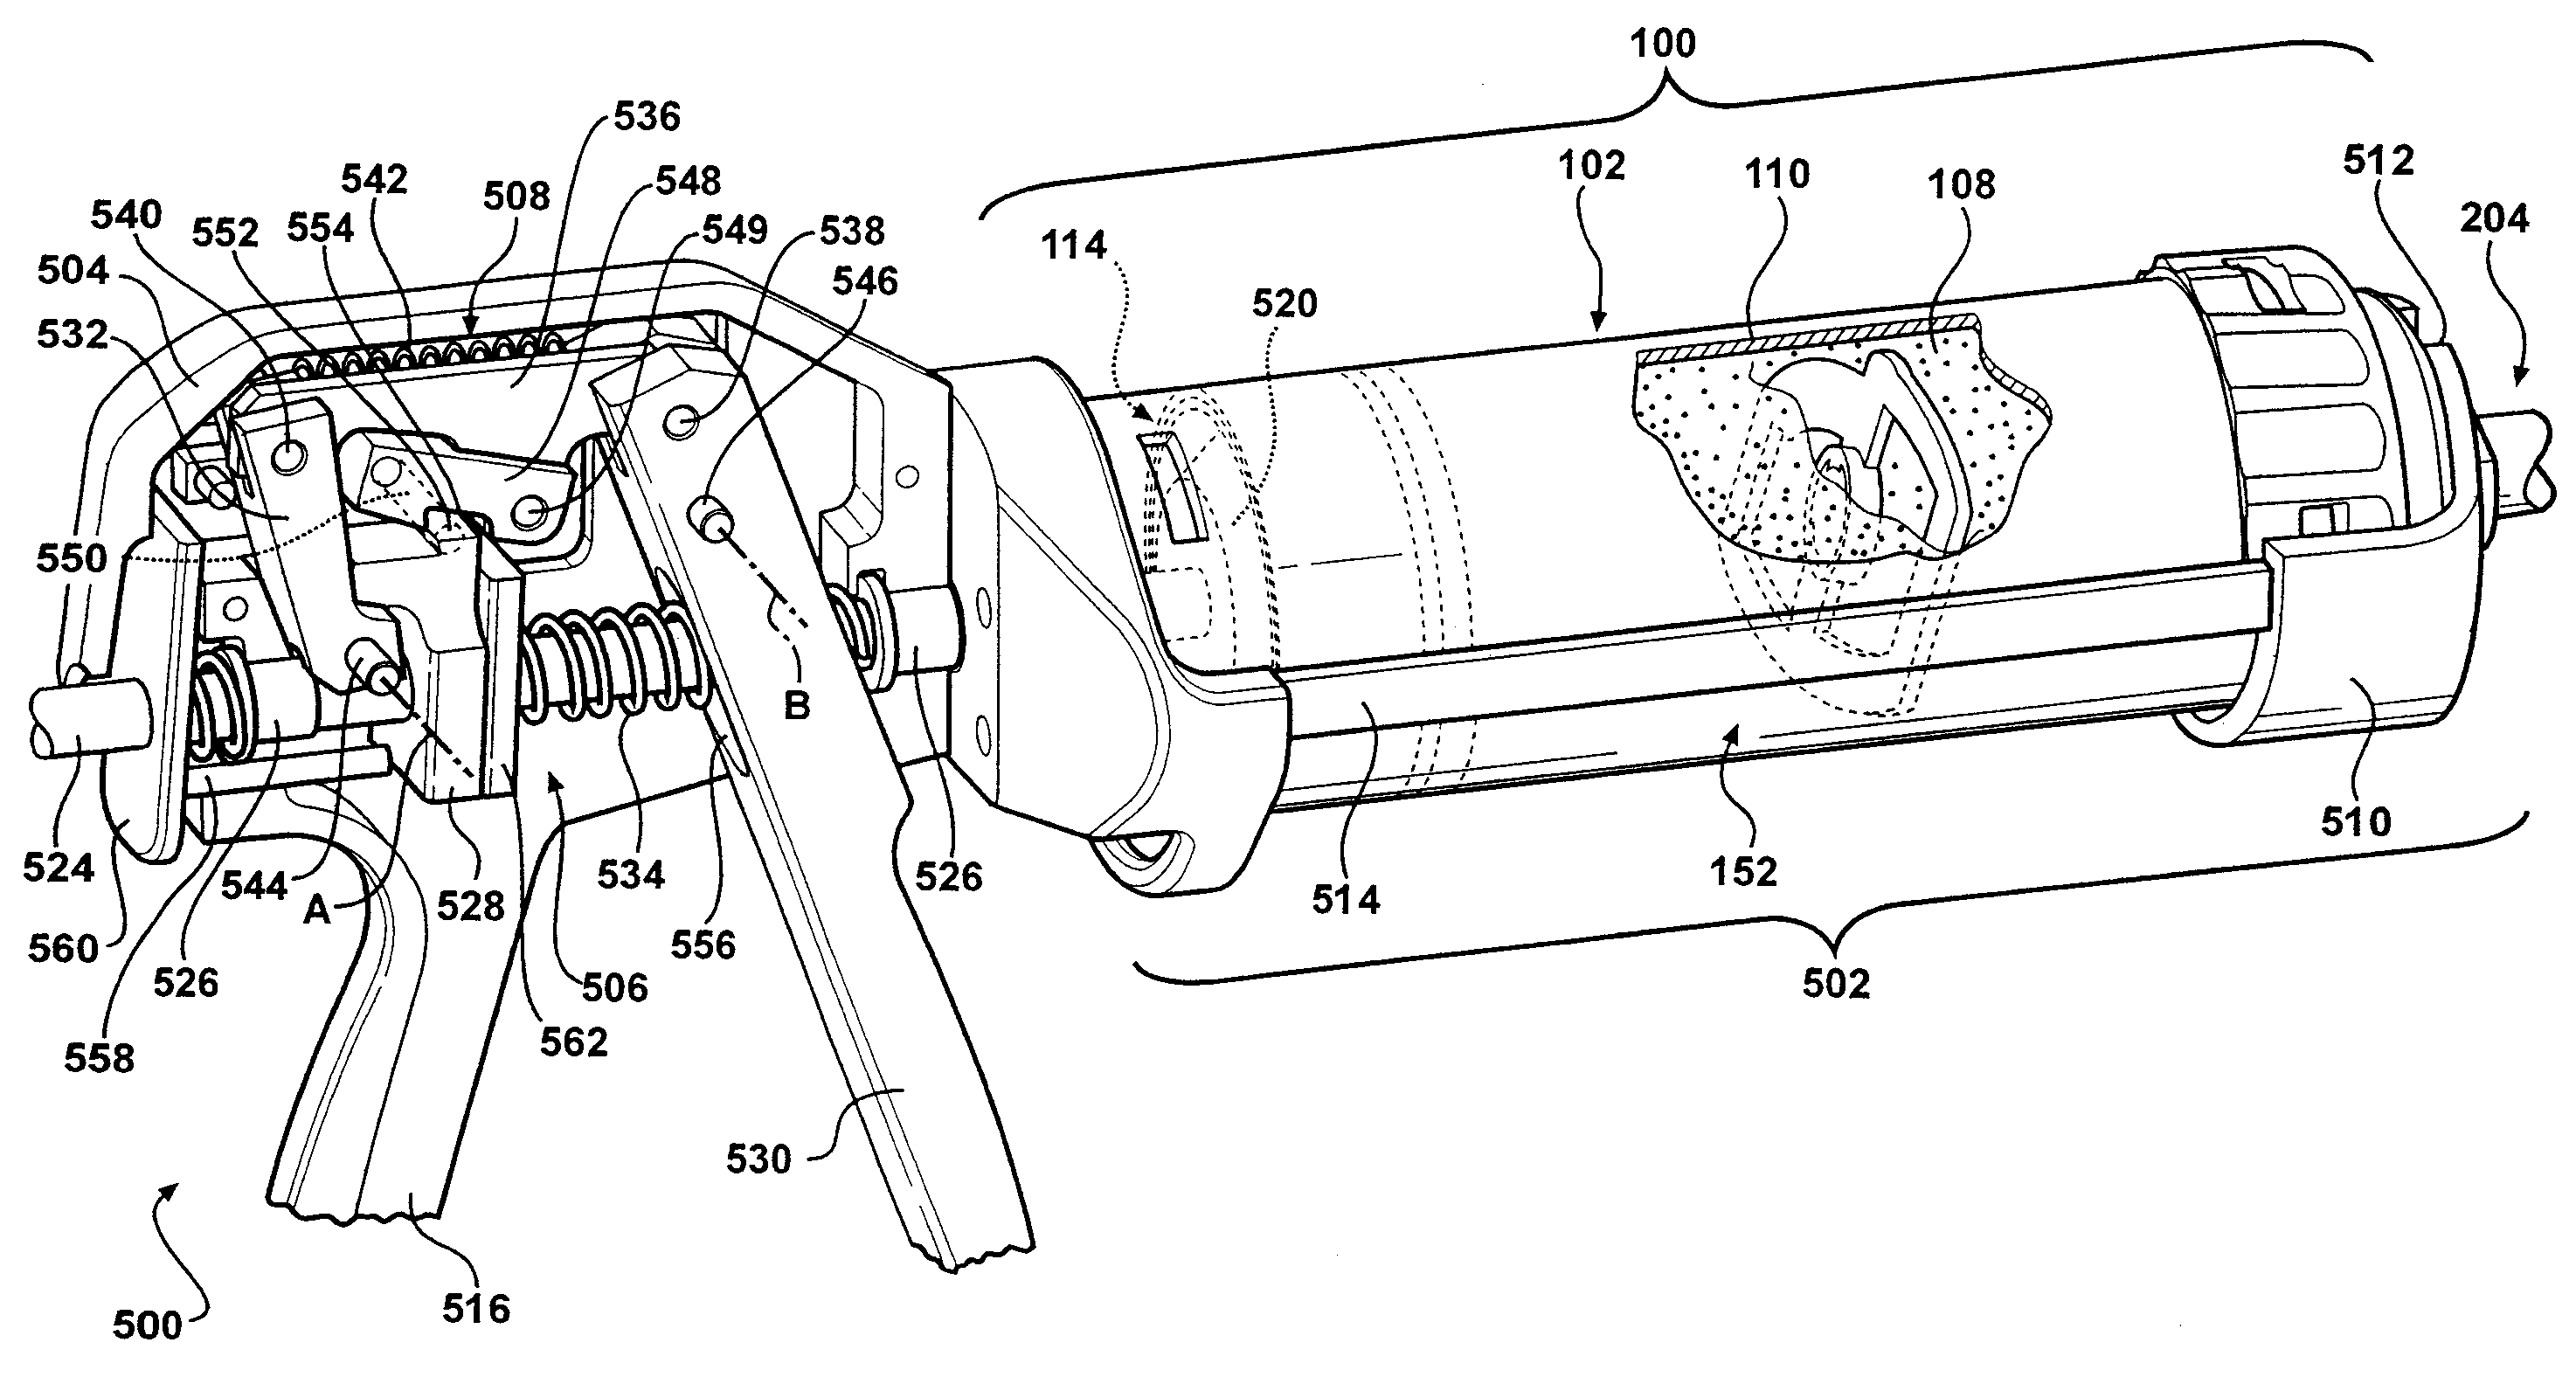 Bone cement mixing and delivery system including a delivery gun and a cartridge having a piston, the delivery gun configured to release the piston